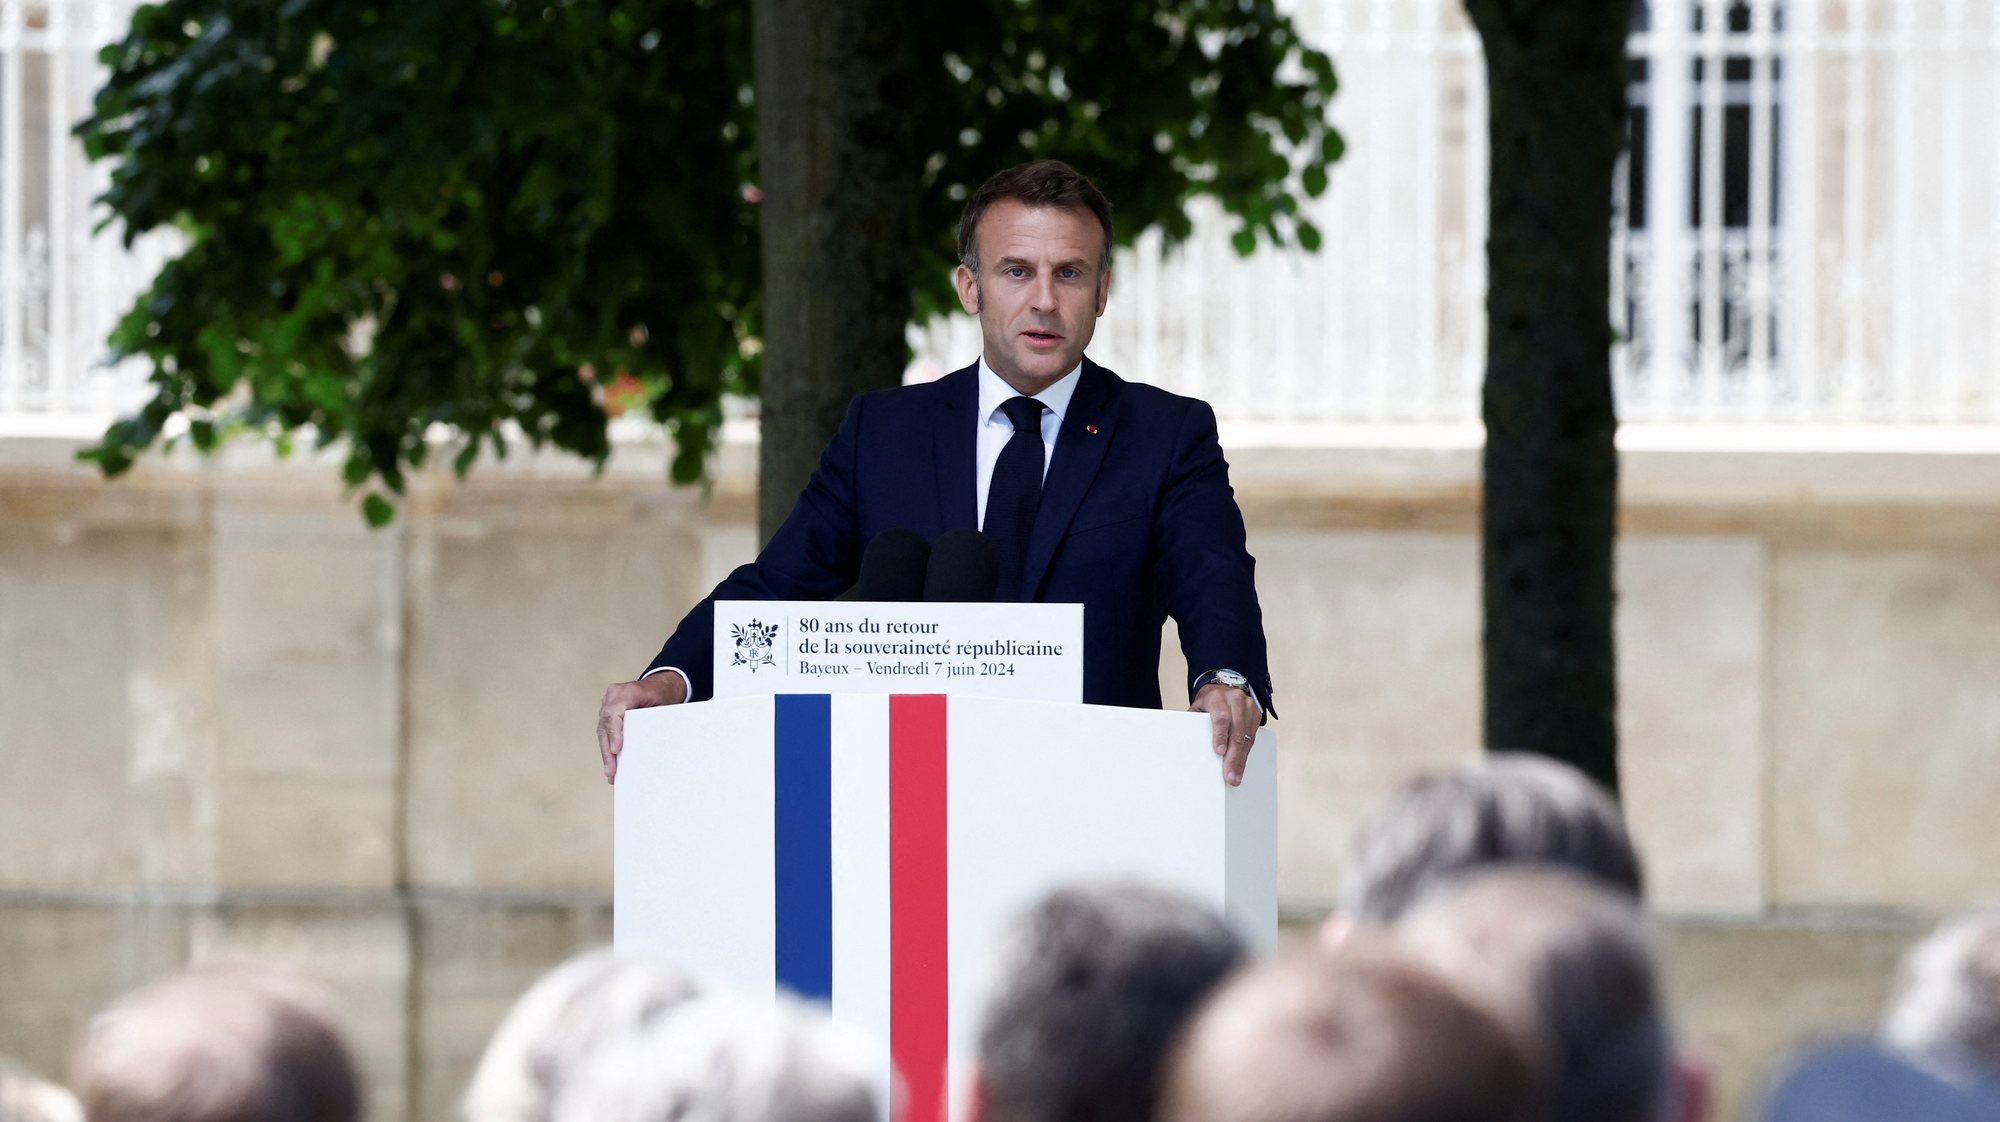 epa11395000 French President Emmanuel Macron delivers a speech during a ceremony to commemorate the return of republican sovereignty, on Place Charles de Gaulle in Bayeux, northwestern France, 07 June 2024. Macron visits Bayeux to celebrate the return of sovereign and republican France, and the new French institutions which were put in place as the territories were liberated. The ceremony is part of the 80th anniversary of the 1944 D-Day landings in Normandy region.  EPA/BENOIT TESSIER / POOL  MAXPPP OUT